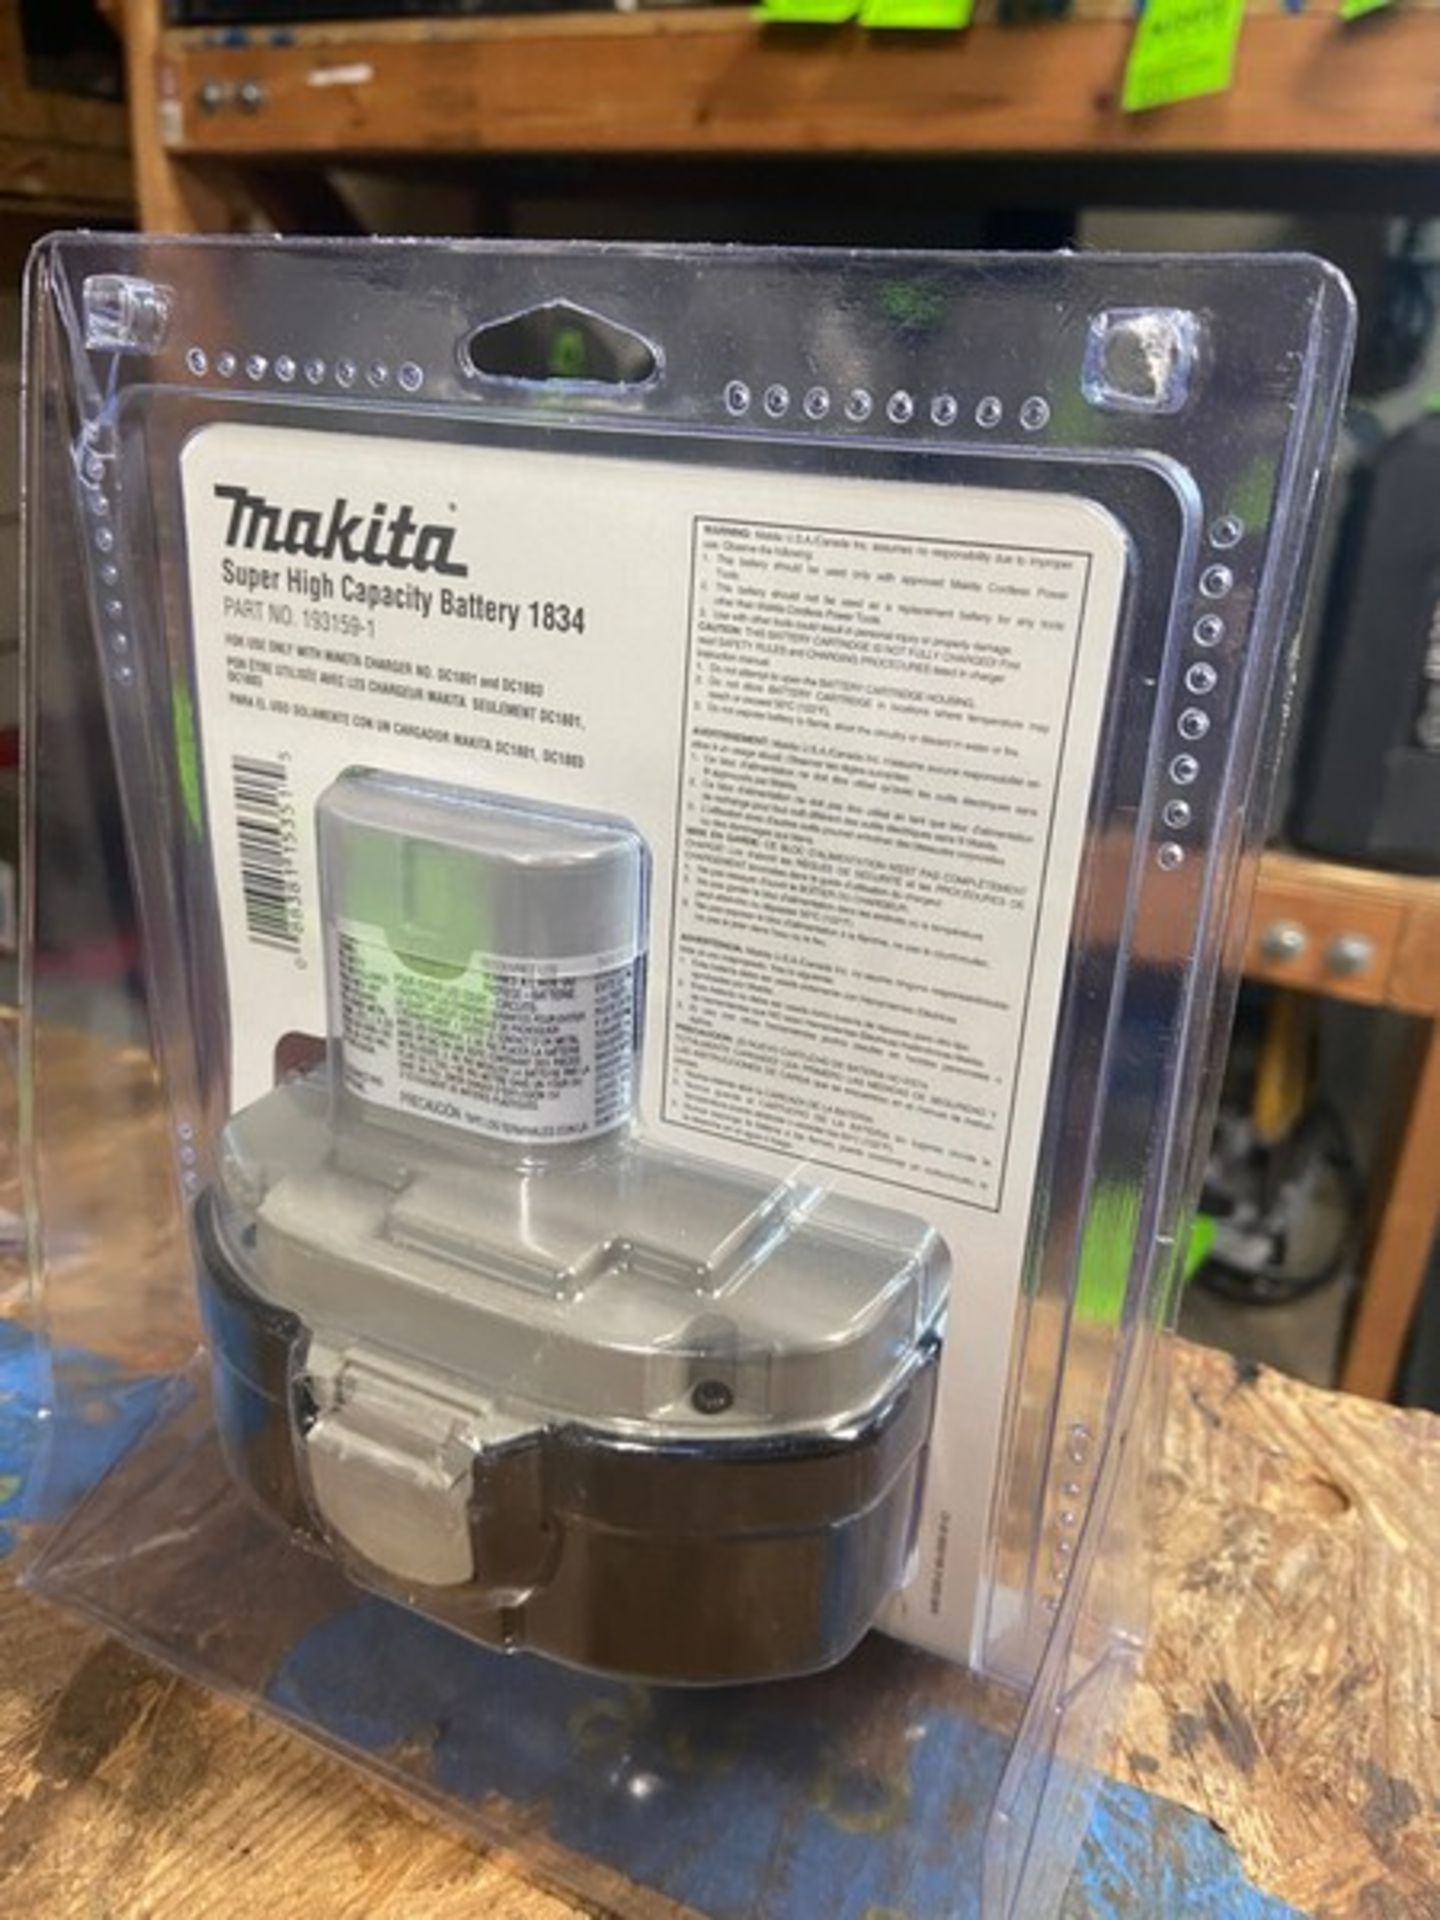 NEW Makita Regardeable Nickel-Metal Hydride Battery 1834, 18 Volts (LOCATED IN MONROEVILLE, PA) - Image 6 of 6